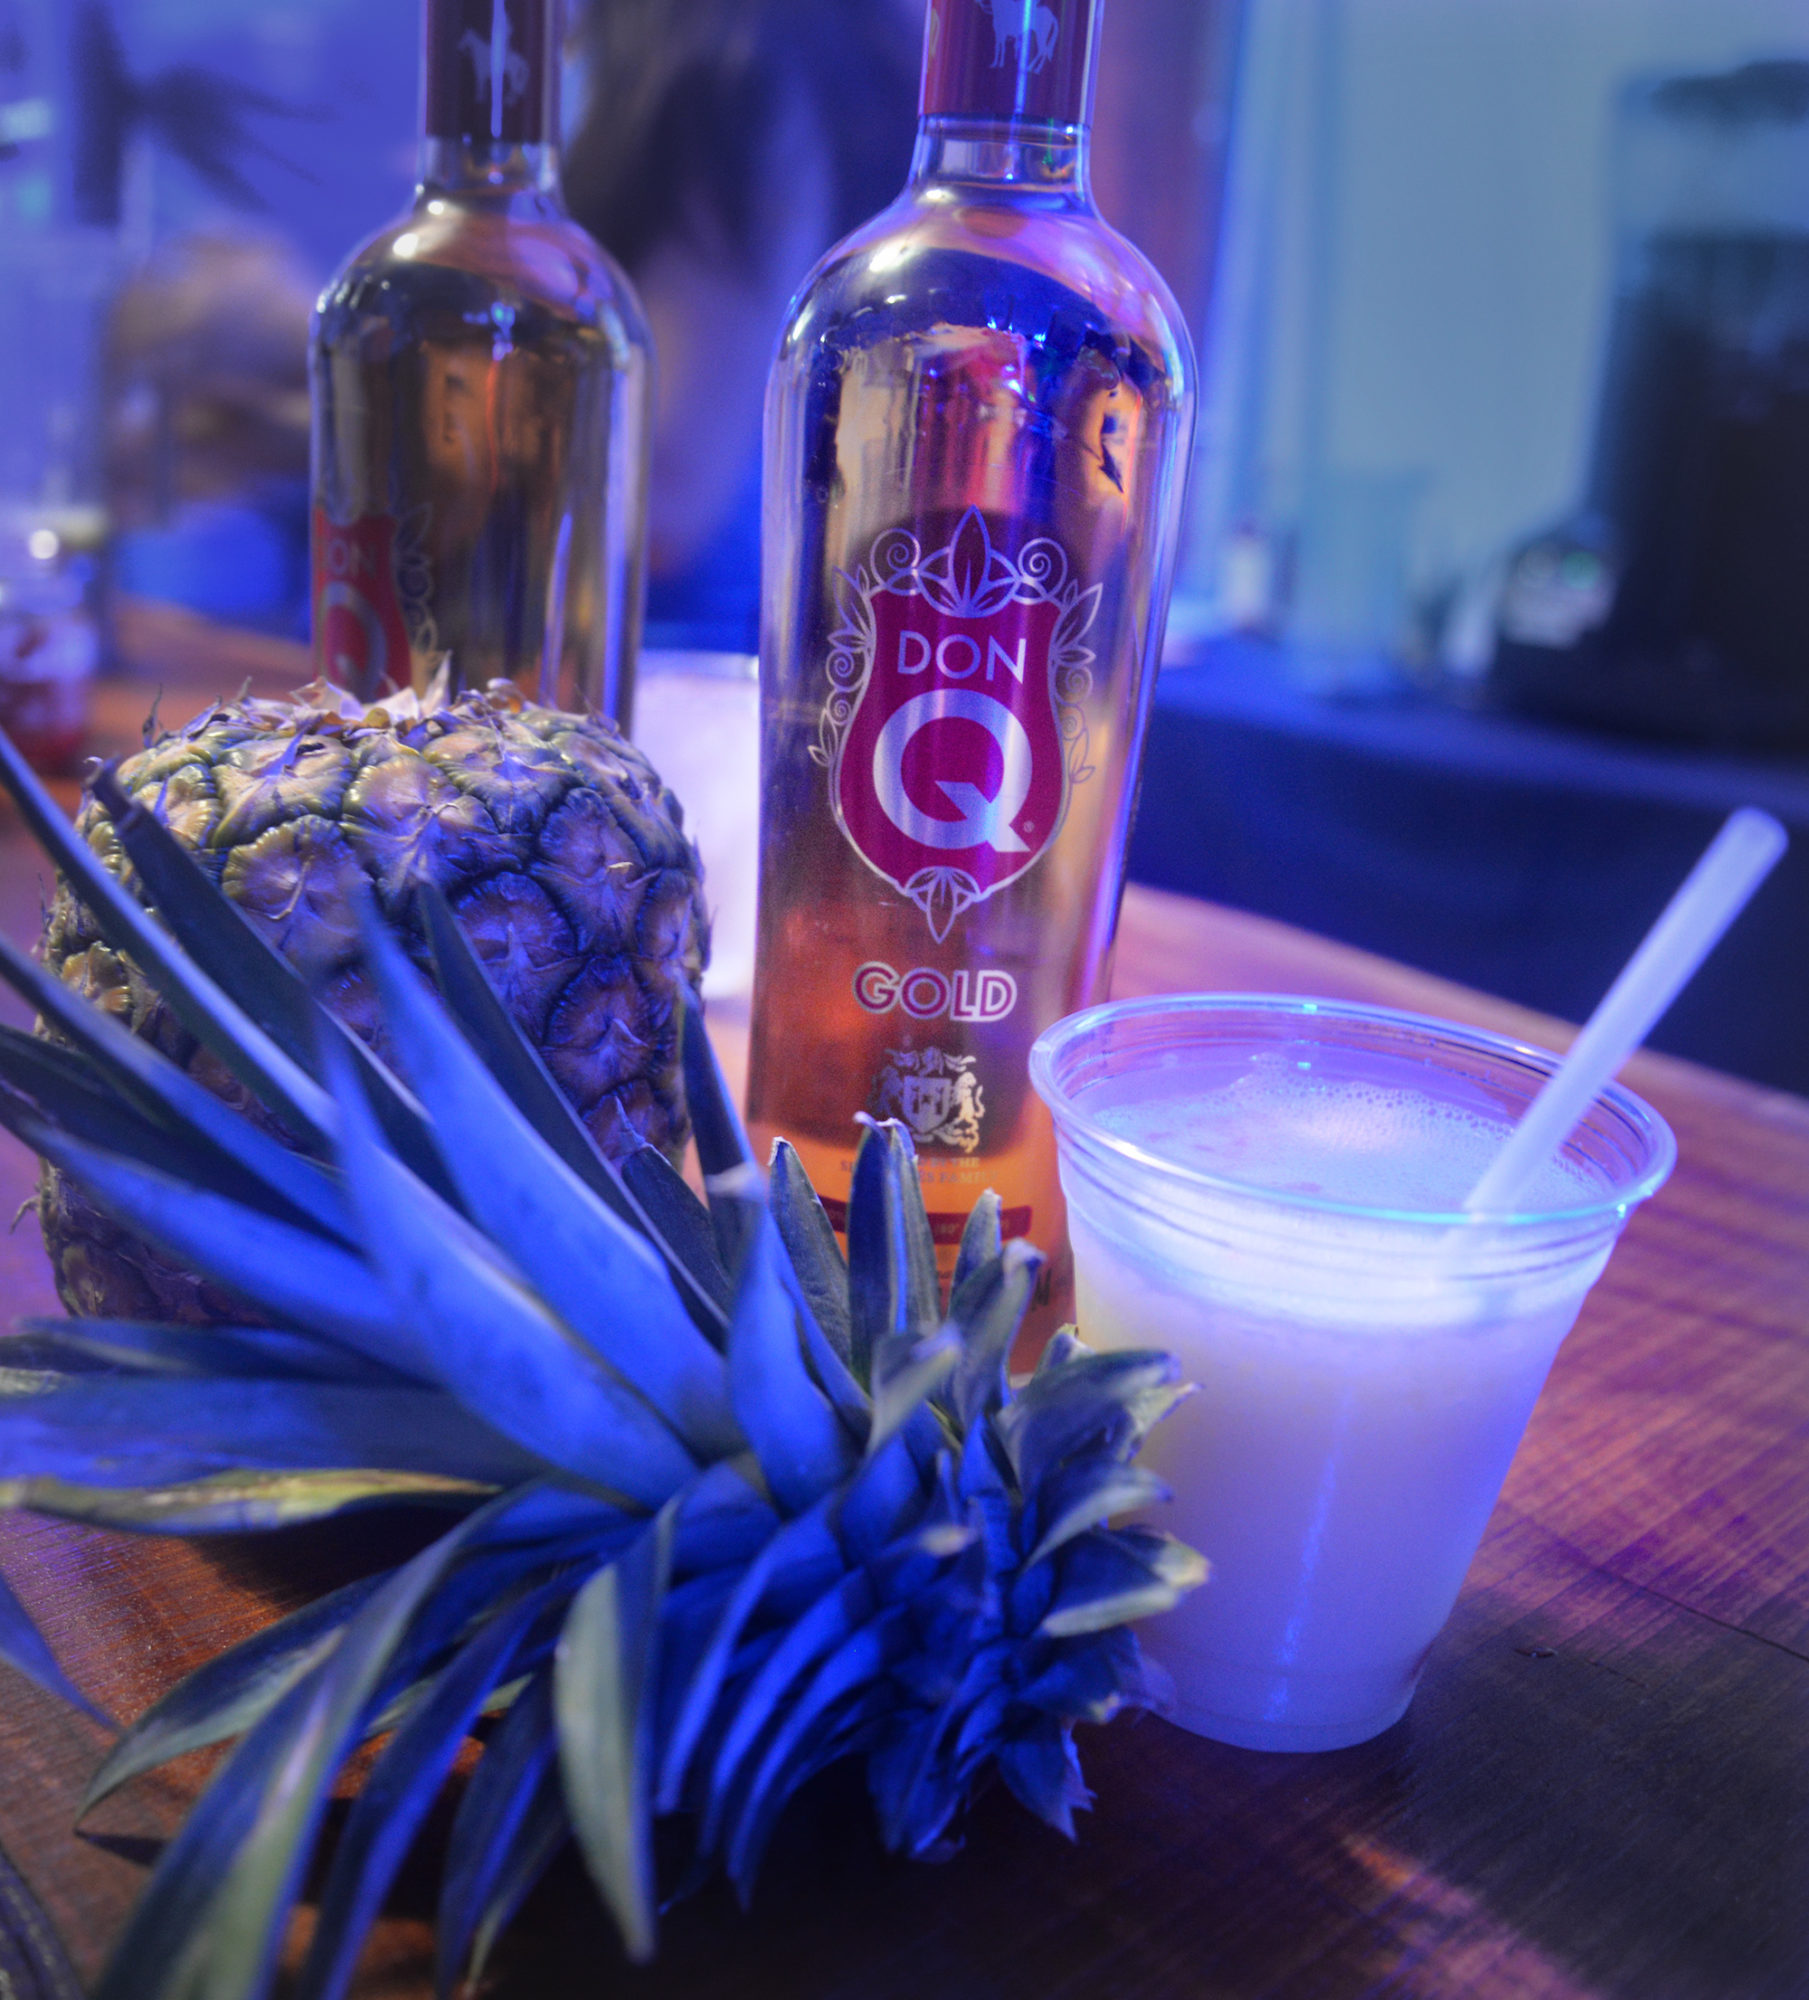 Piña colada made with Don Q Gold on display at the Taste of Rum festival. Photo by Sarah Price